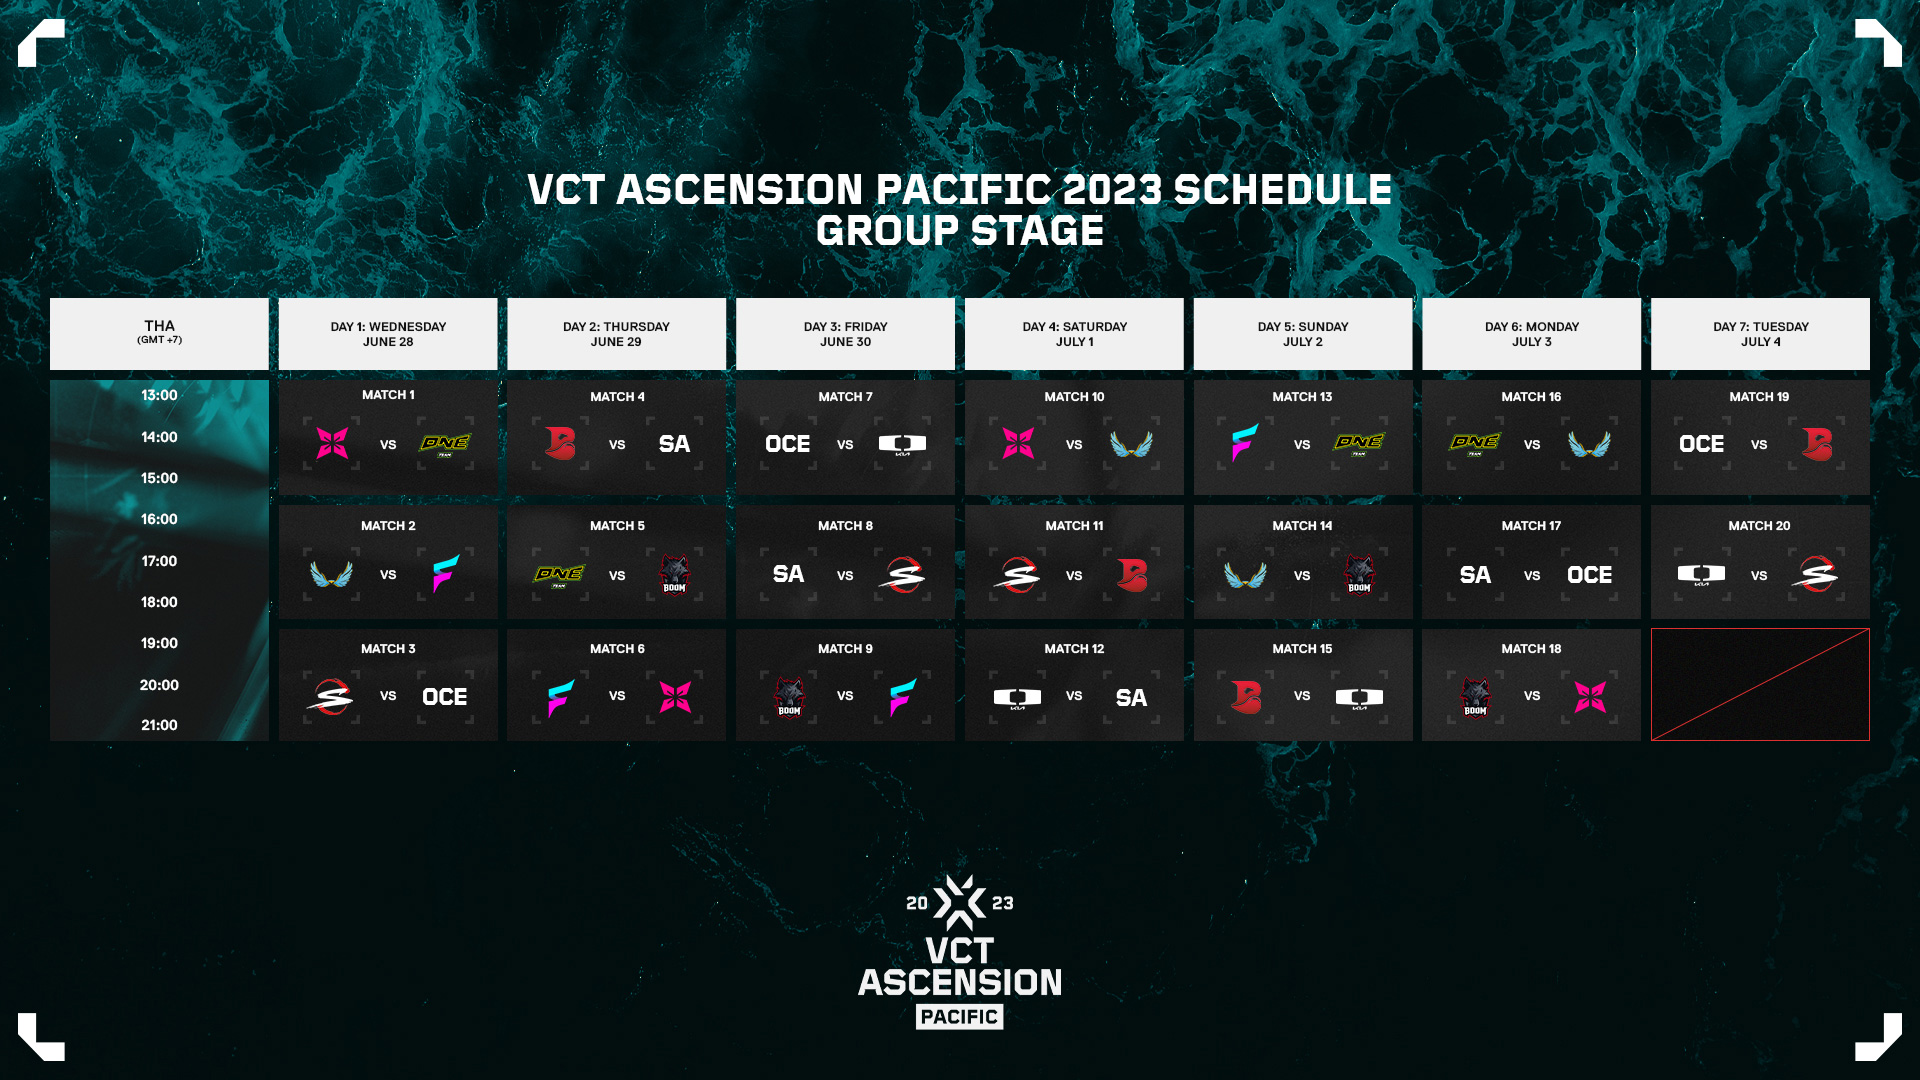 VCT Ascension 2023 Pacific All qualified teams, format, schedule and